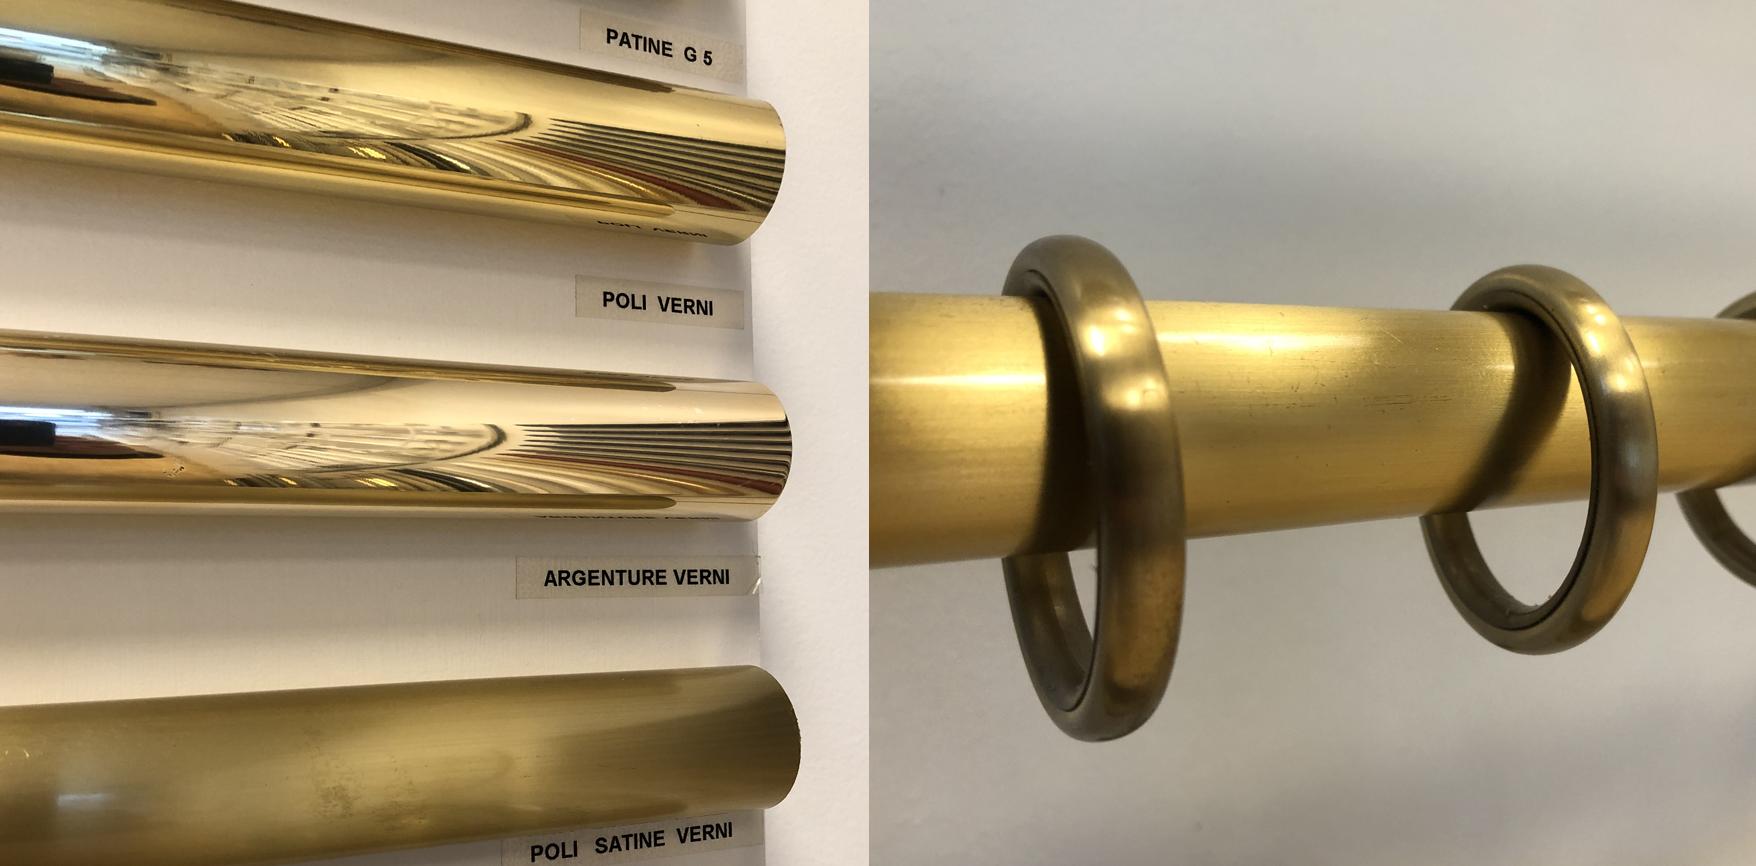 Made to measure : brass rod with various decorative finishes.